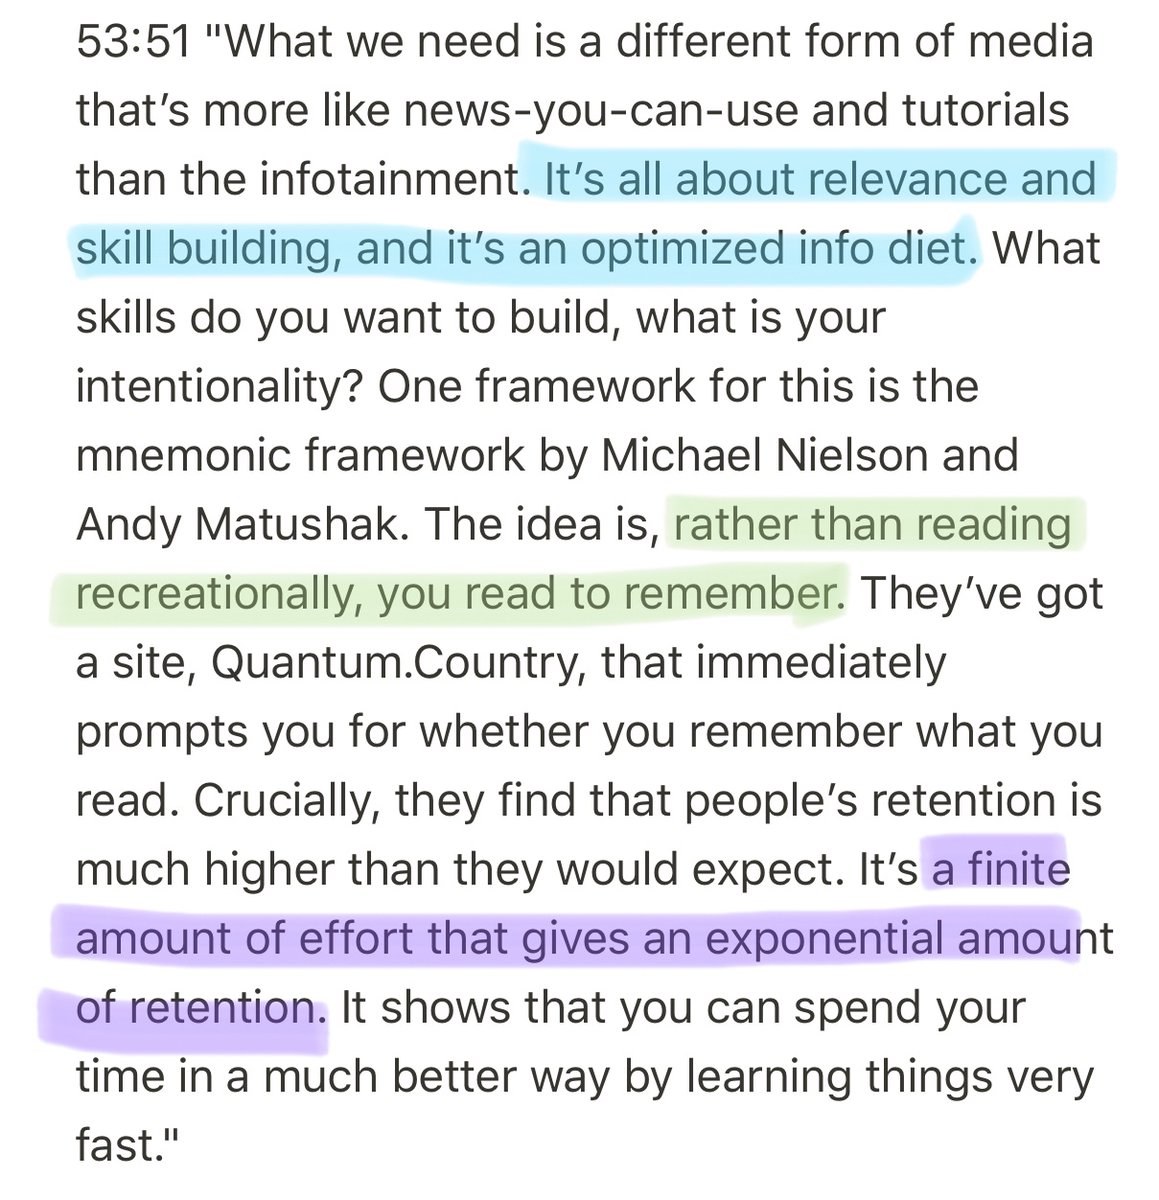 The world is ready for a well-designed, fun to use spaded repetition learning tool. “The idea is, rather than reading recreationally, you read to remember.” —  @balajis